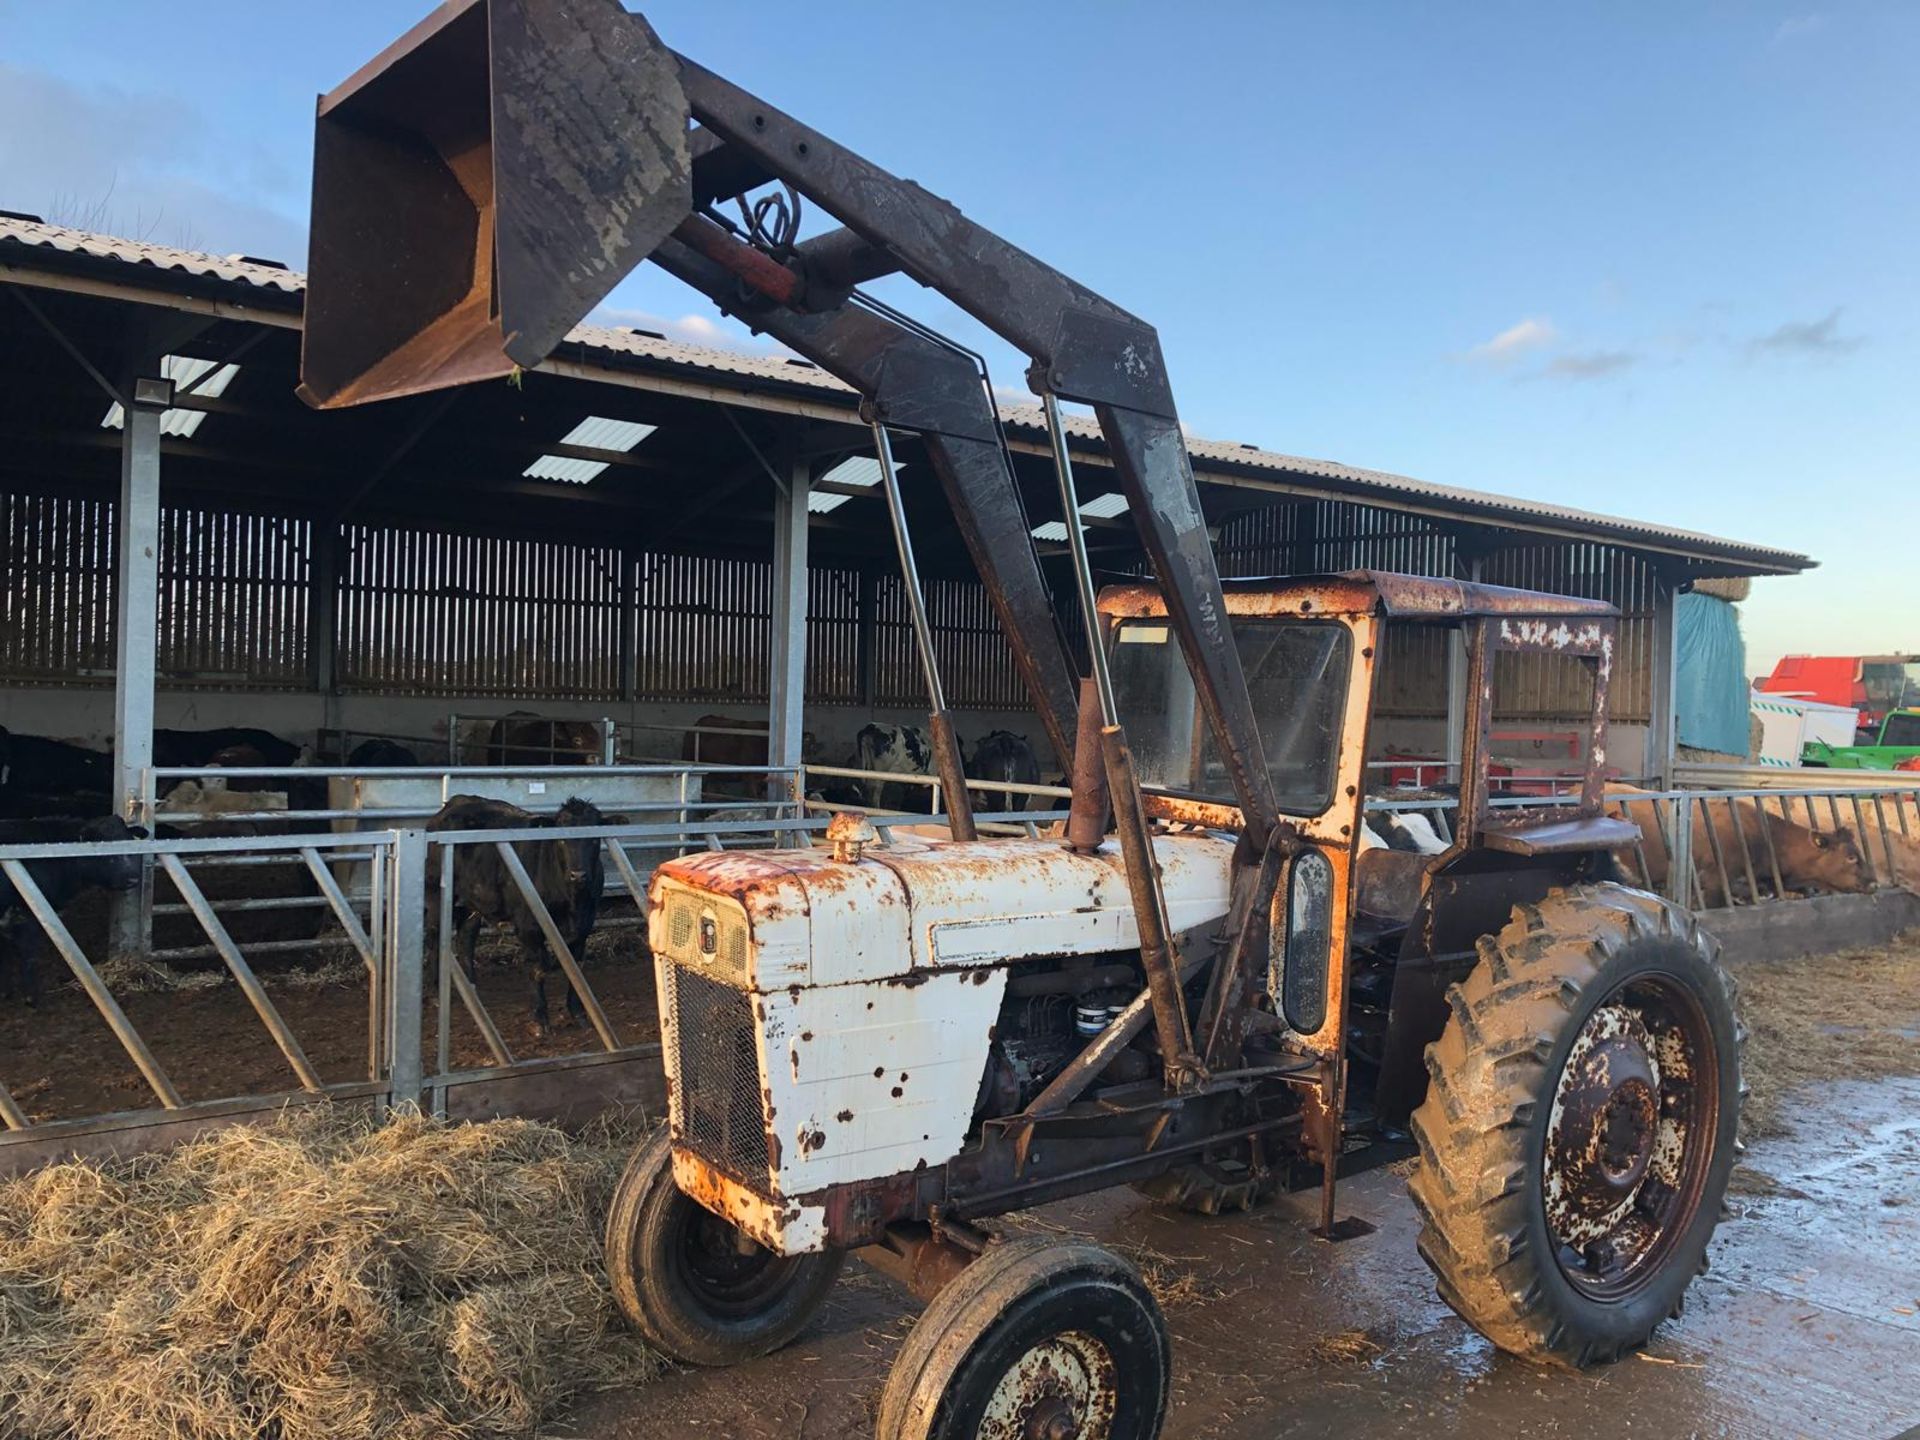 1971 DAVID BROWN 1200 TRACTOR, STARTS WITH A JUMP PACK, DRIVES AND LIFTS *PLUS VAT* - Bild 2 aus 16